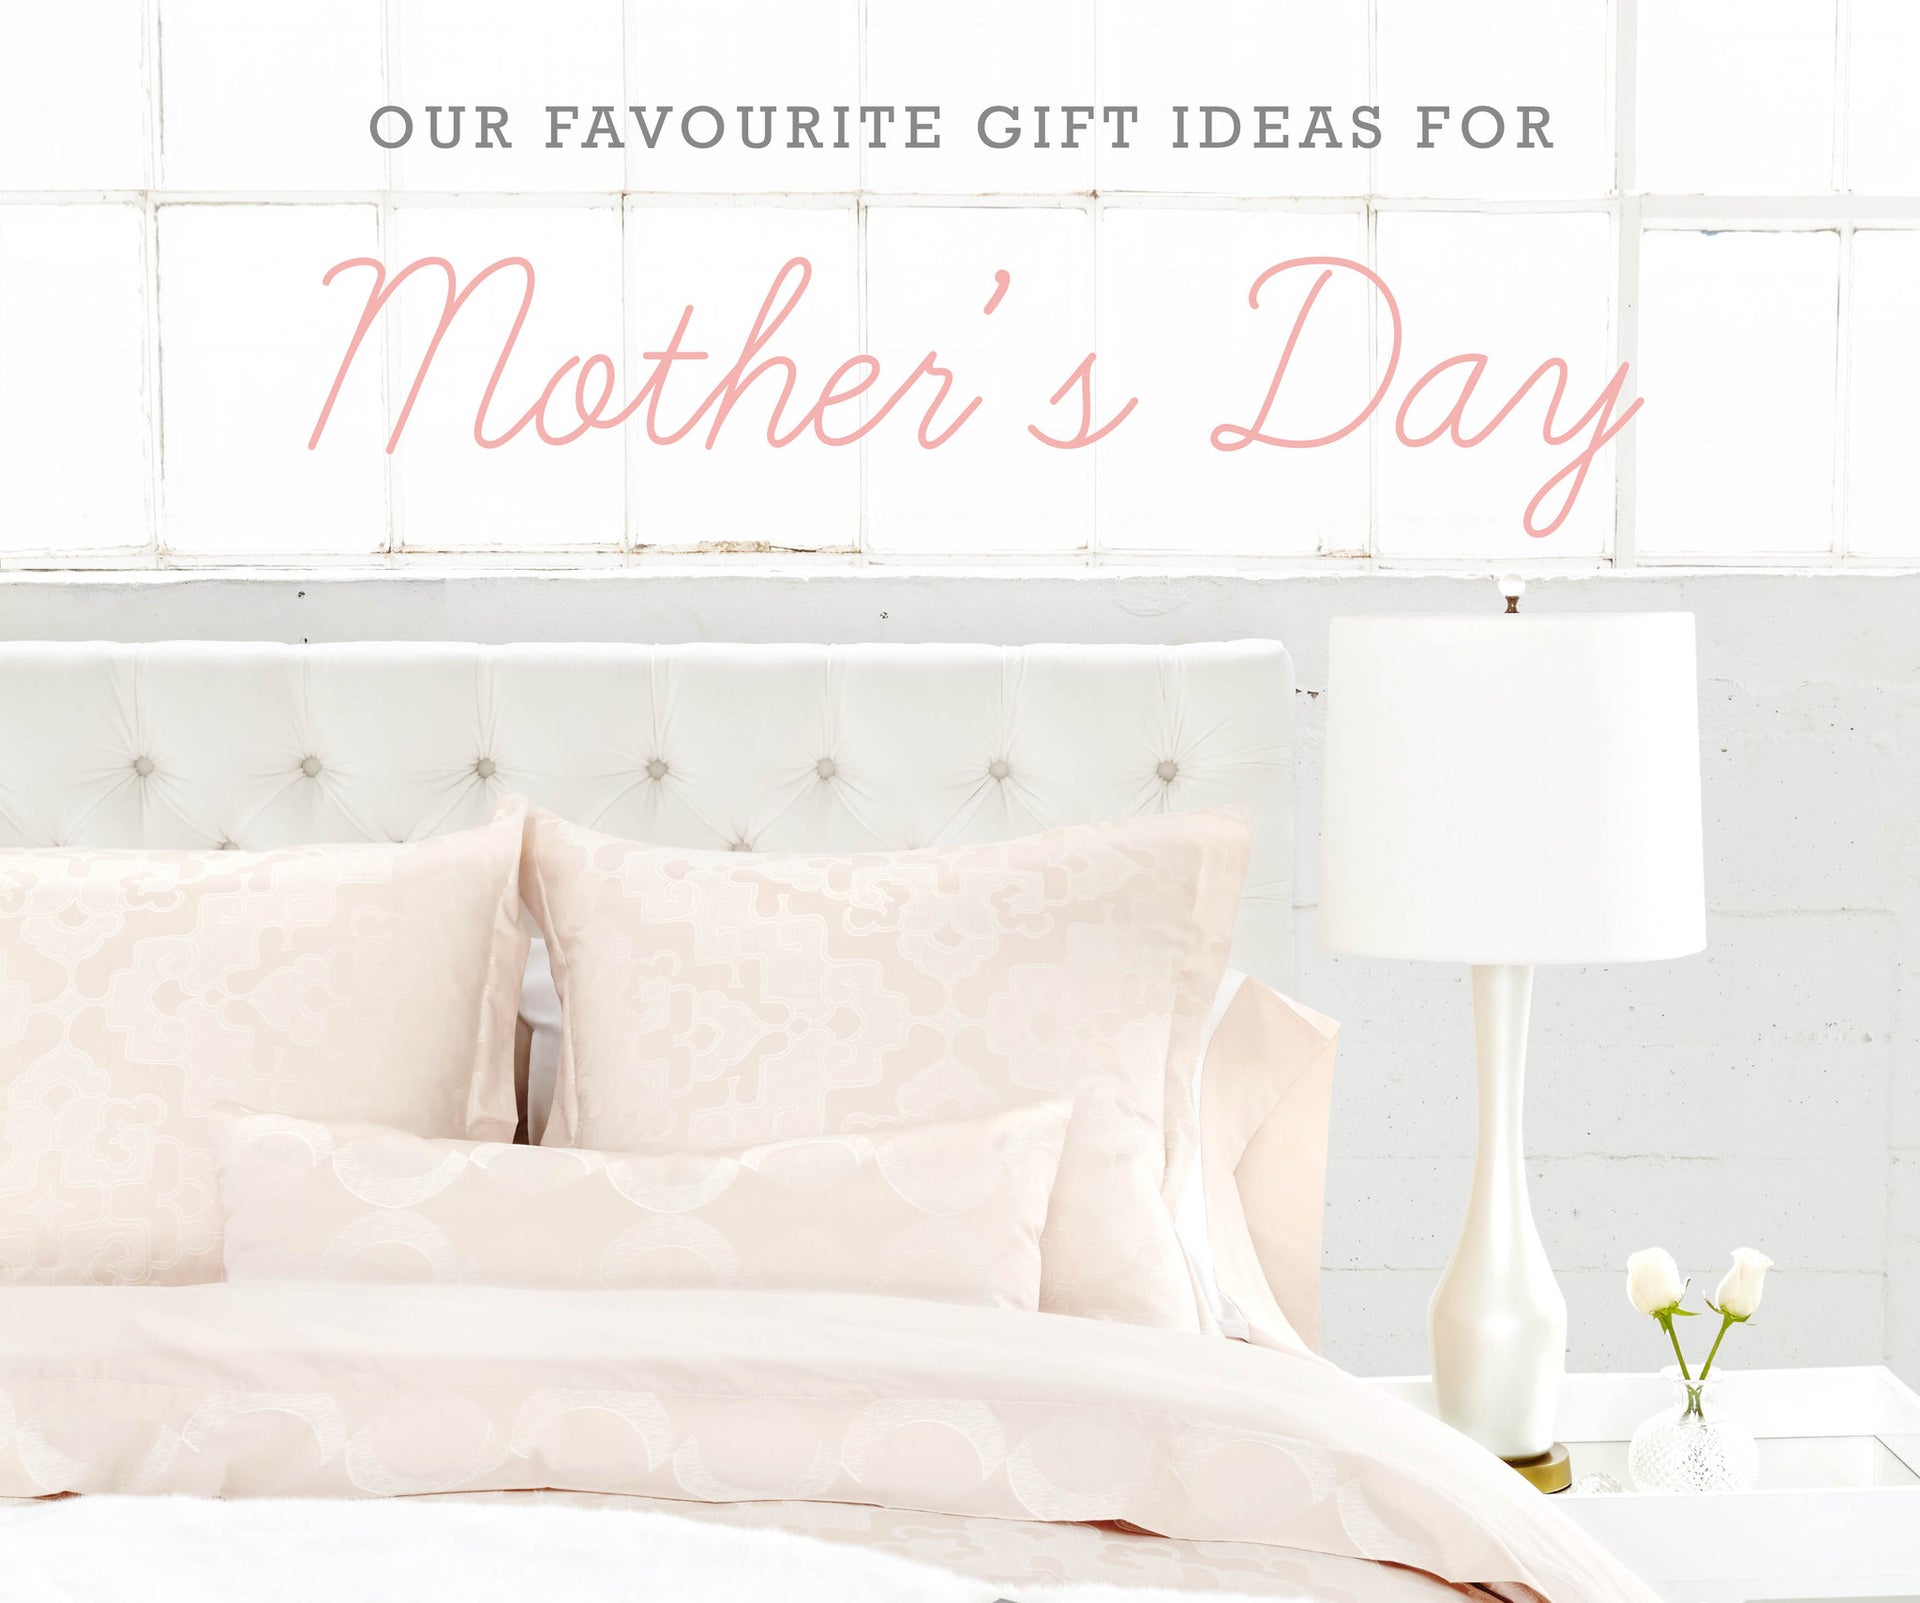 Mother's Day: Our Favourite Gifts & Traditions